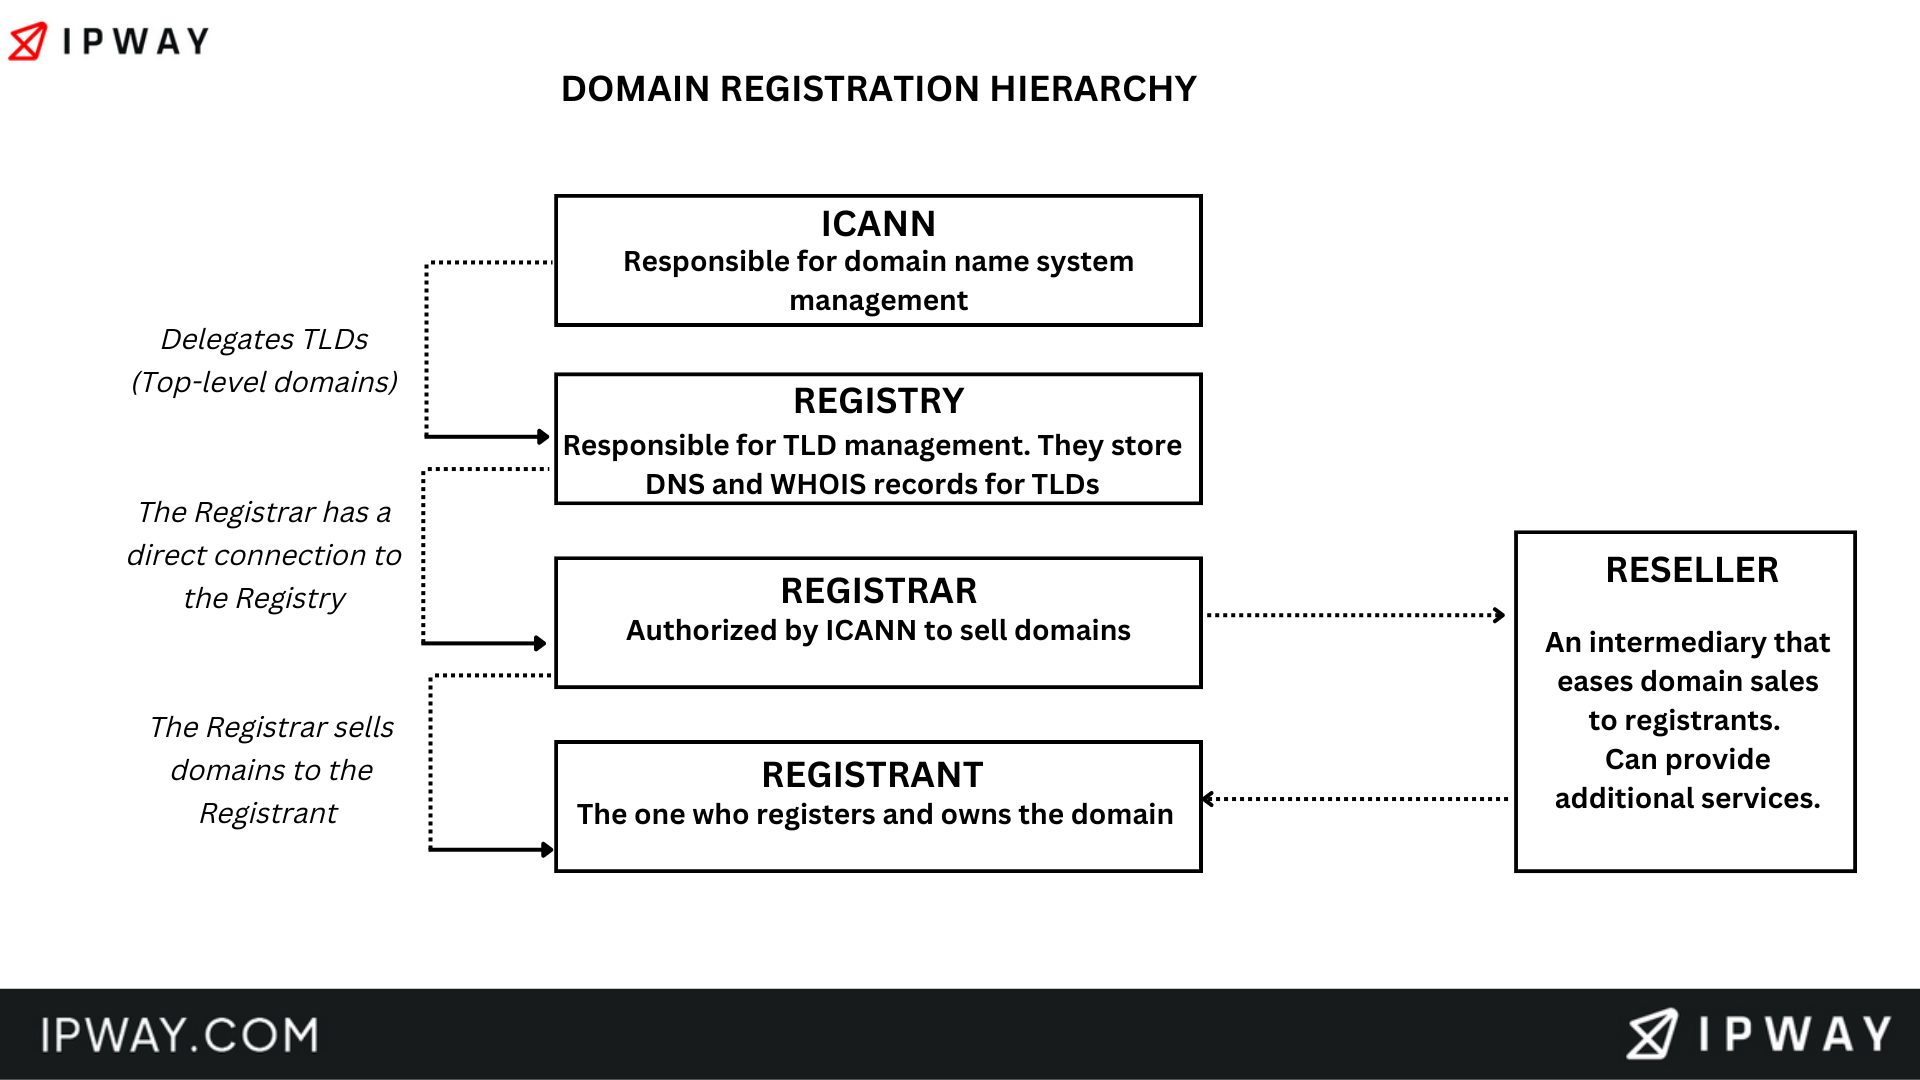 IPWAY - WHOIS Domain Registration Hierarchy